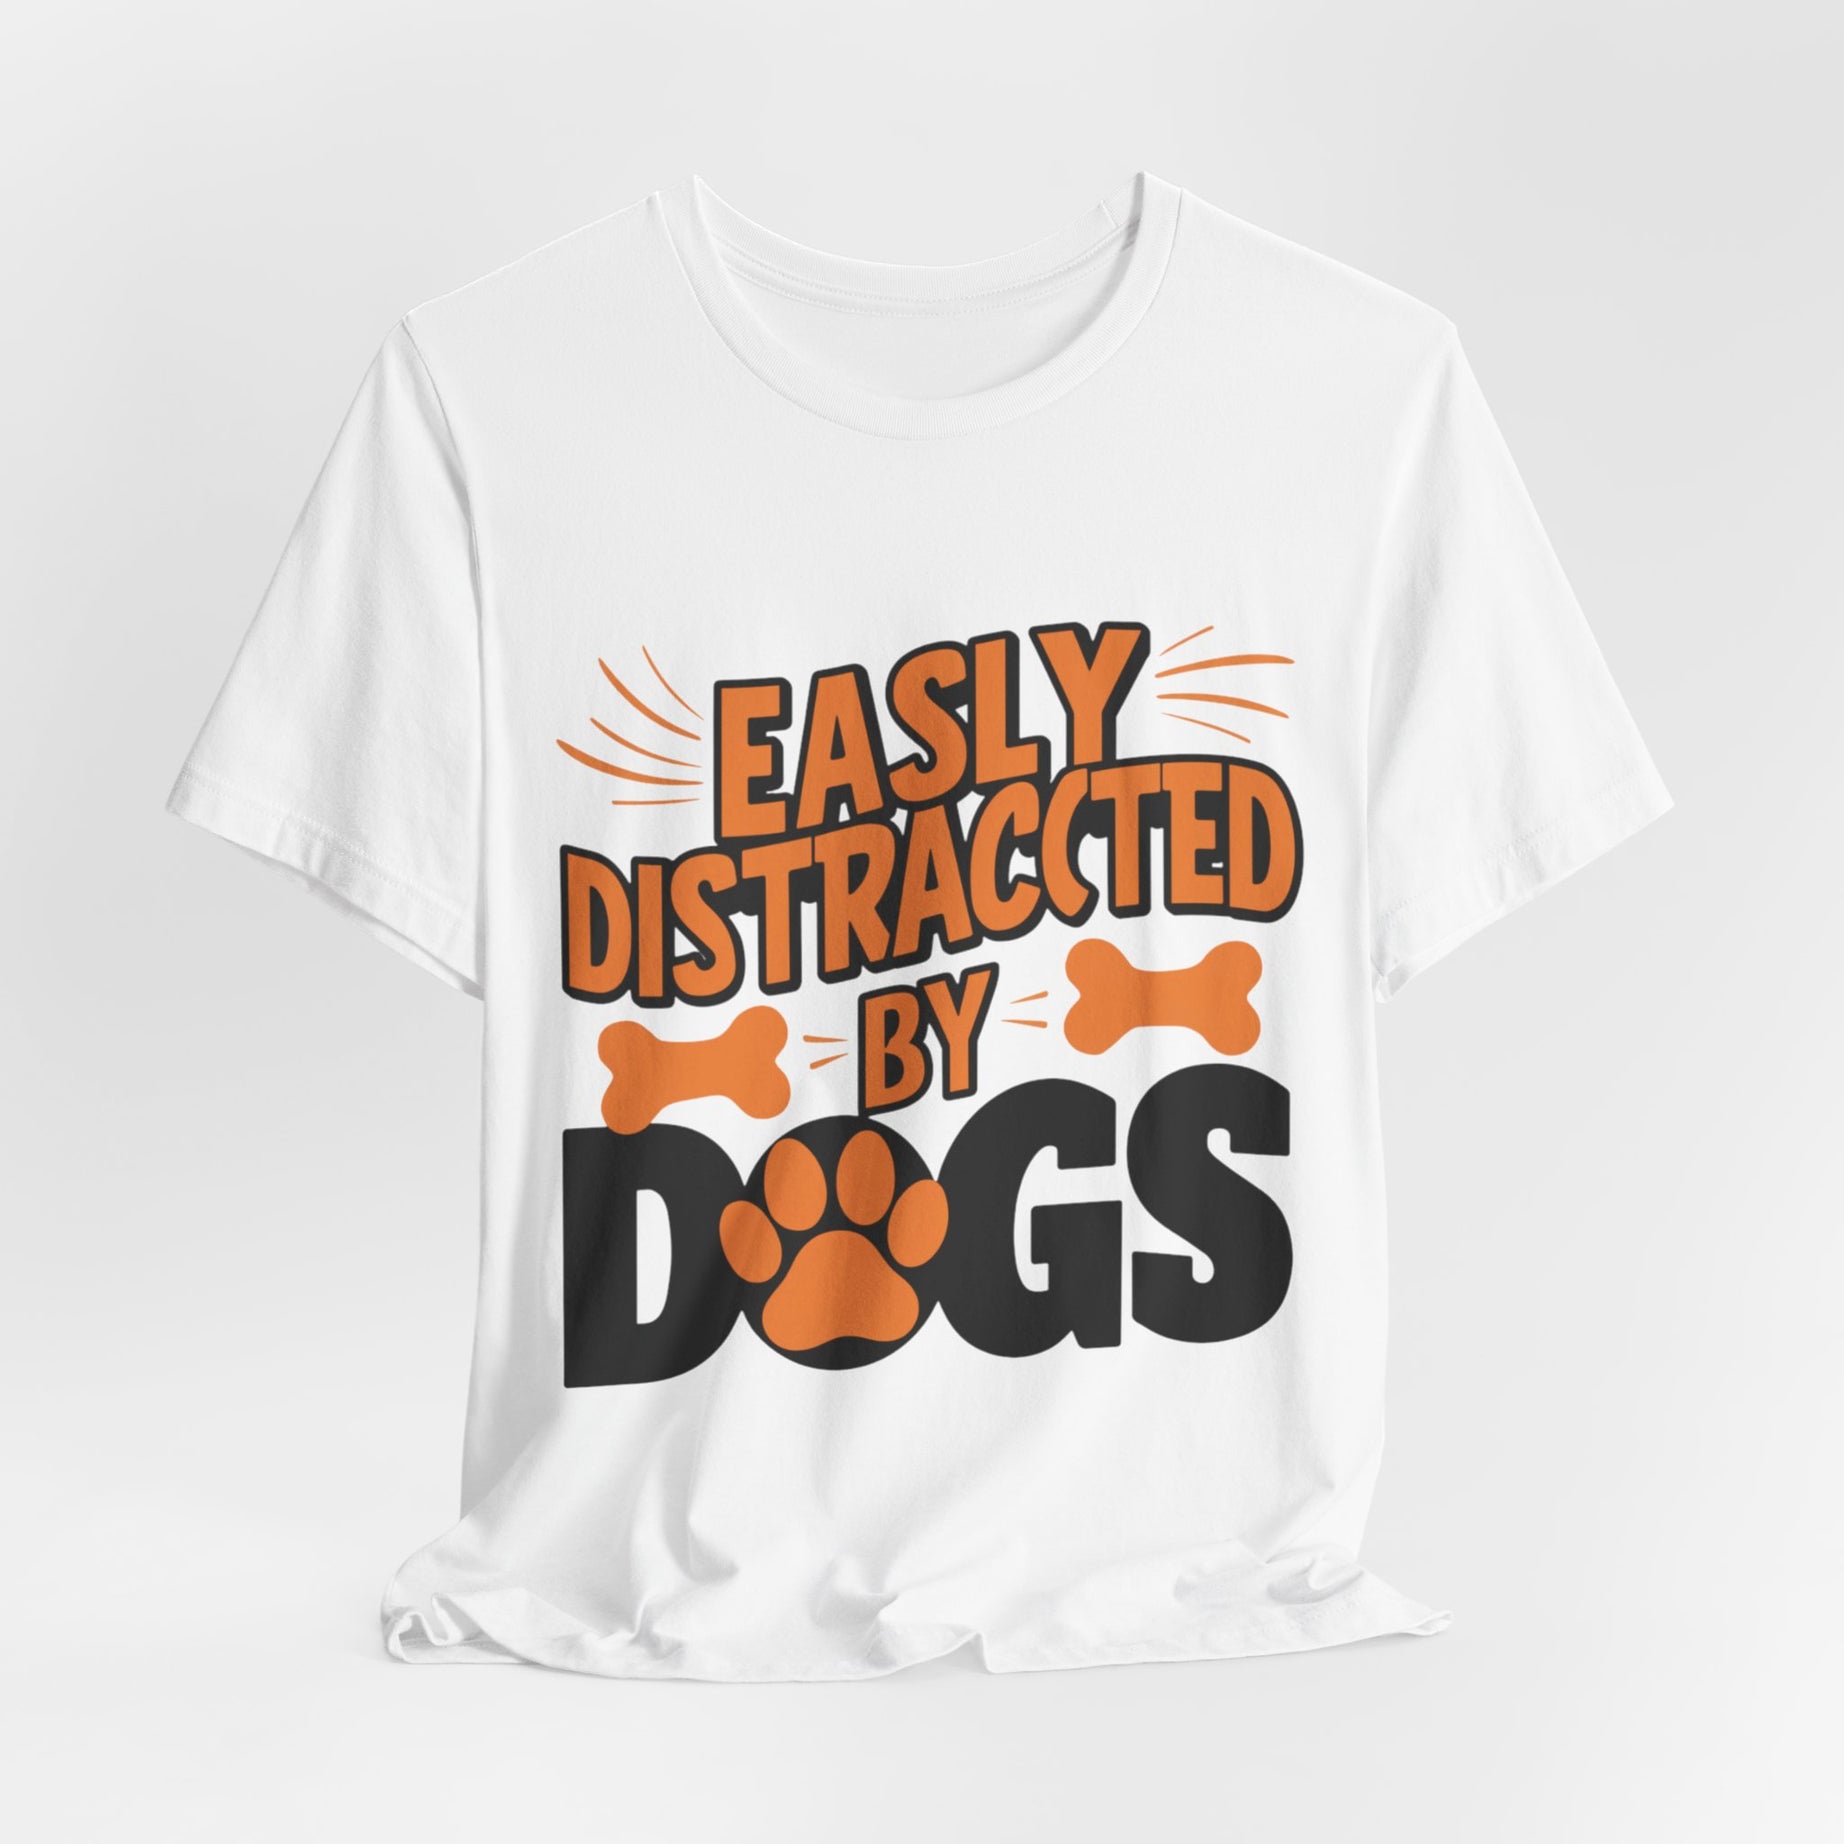 “Easily Distracted by Dogs” Graphic Tee